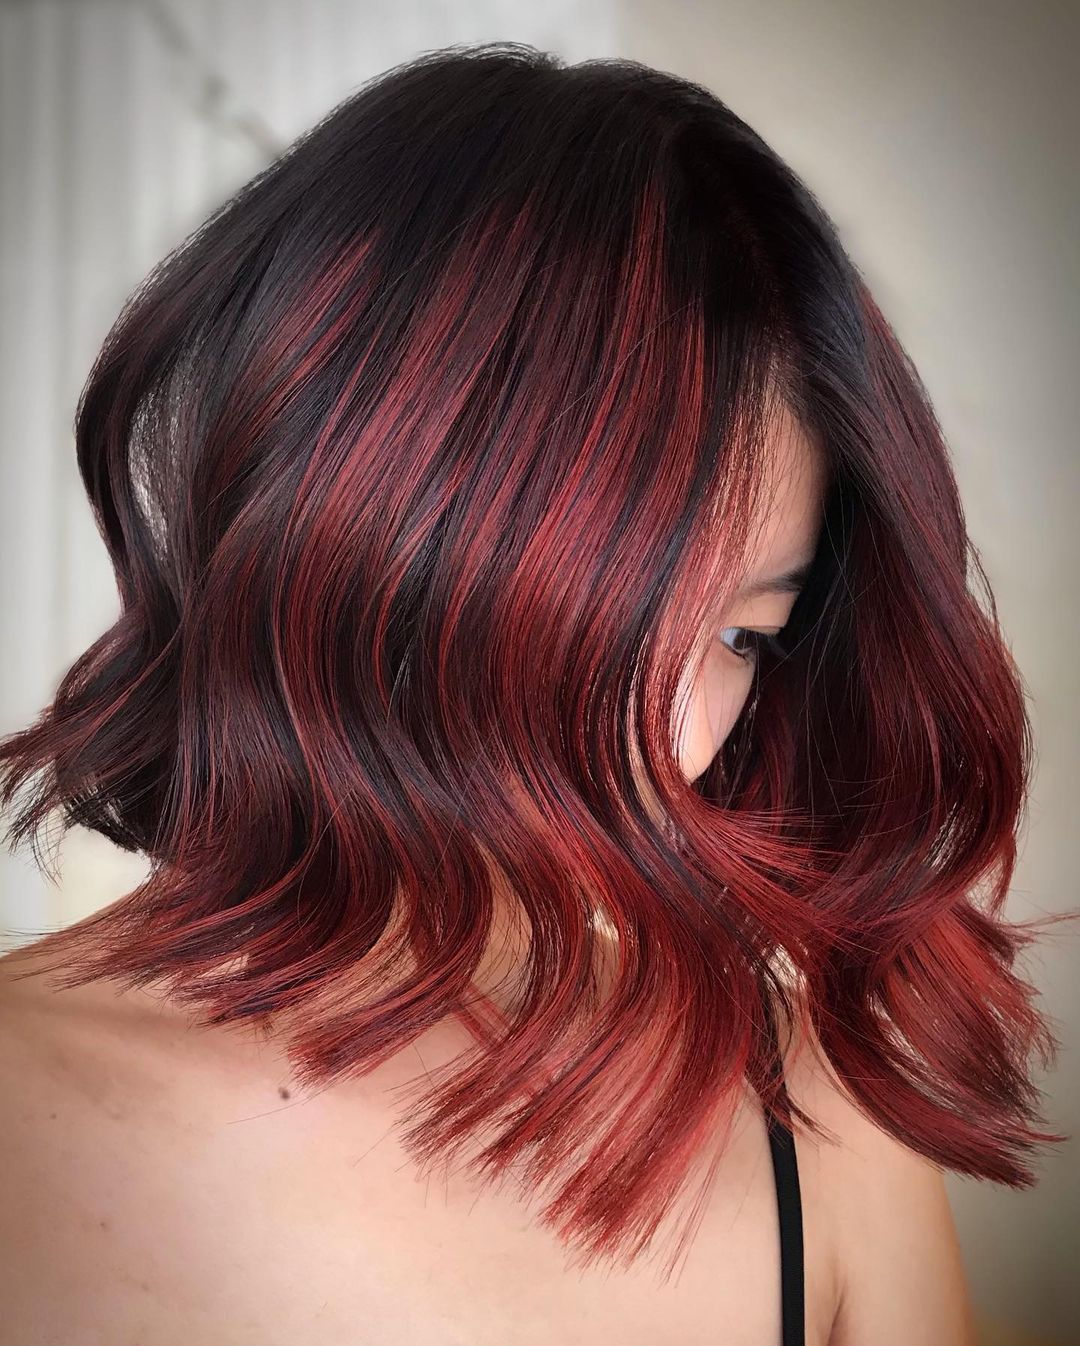 Dark Hair with Bright Red Highlights